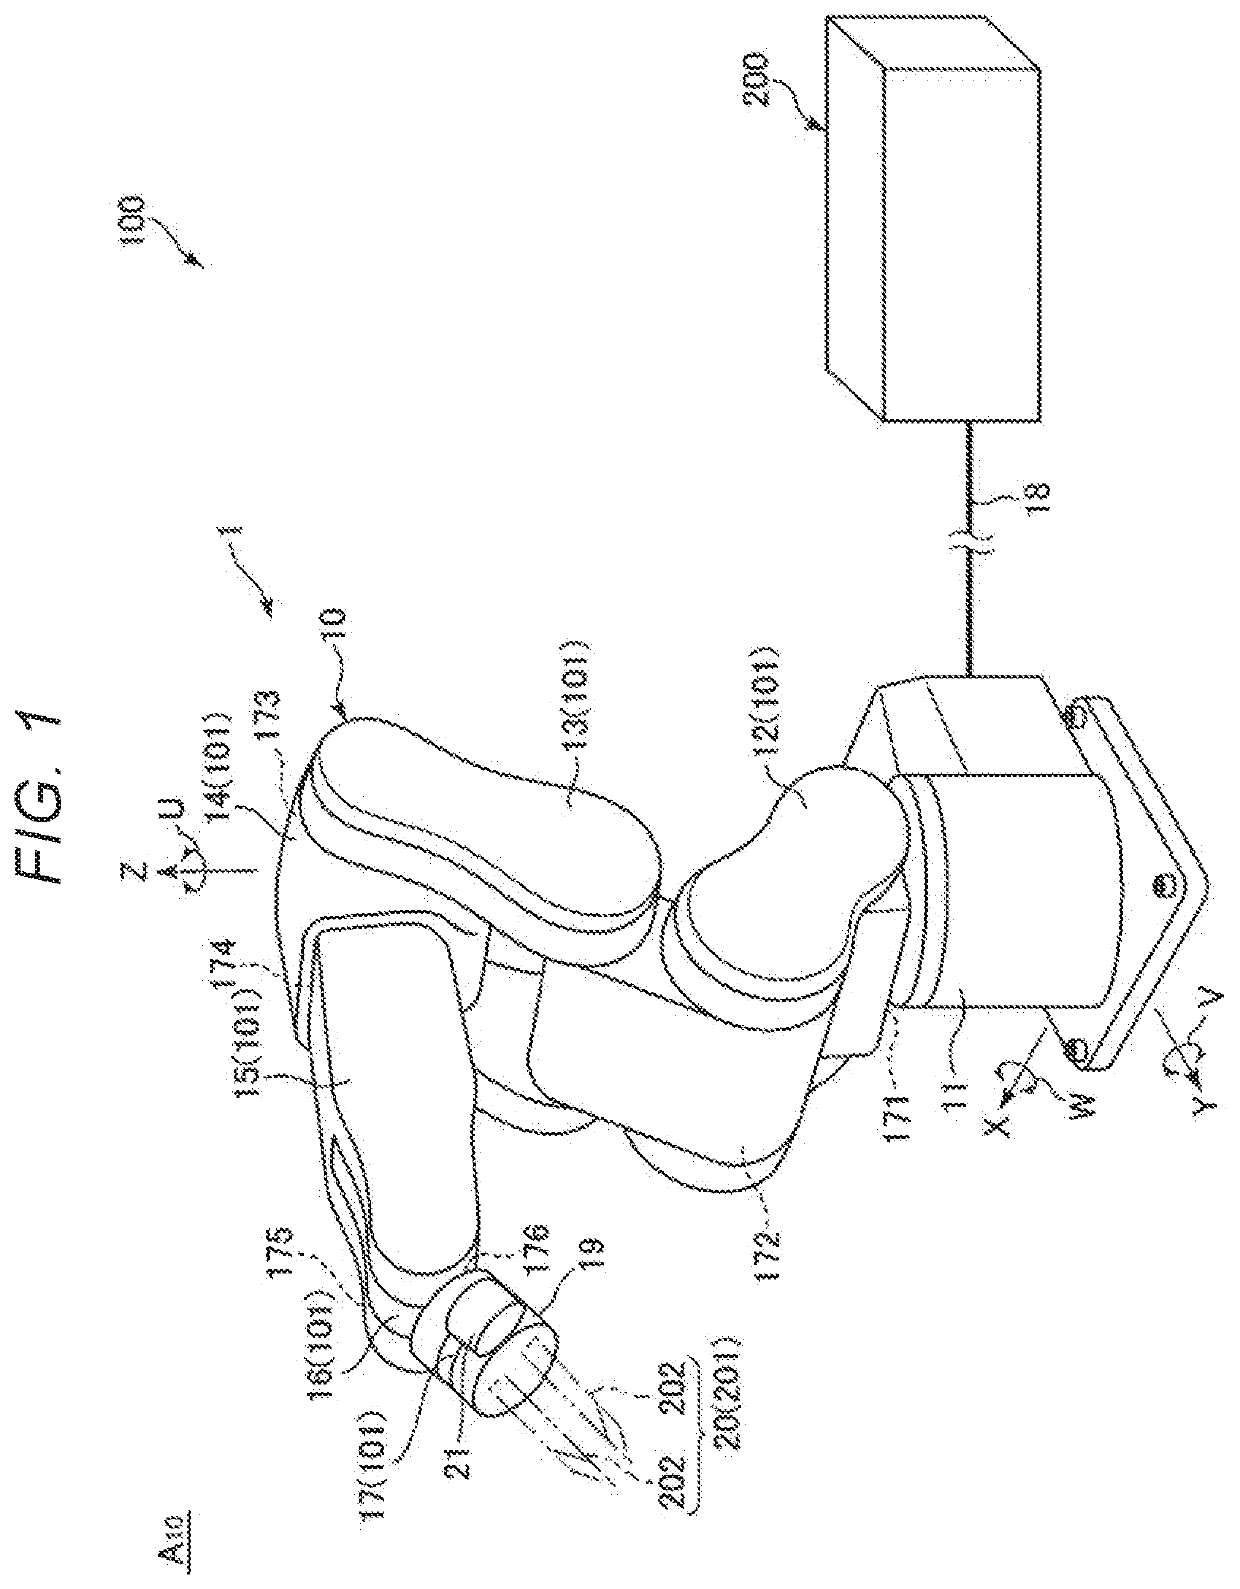 Robot system and coupling method